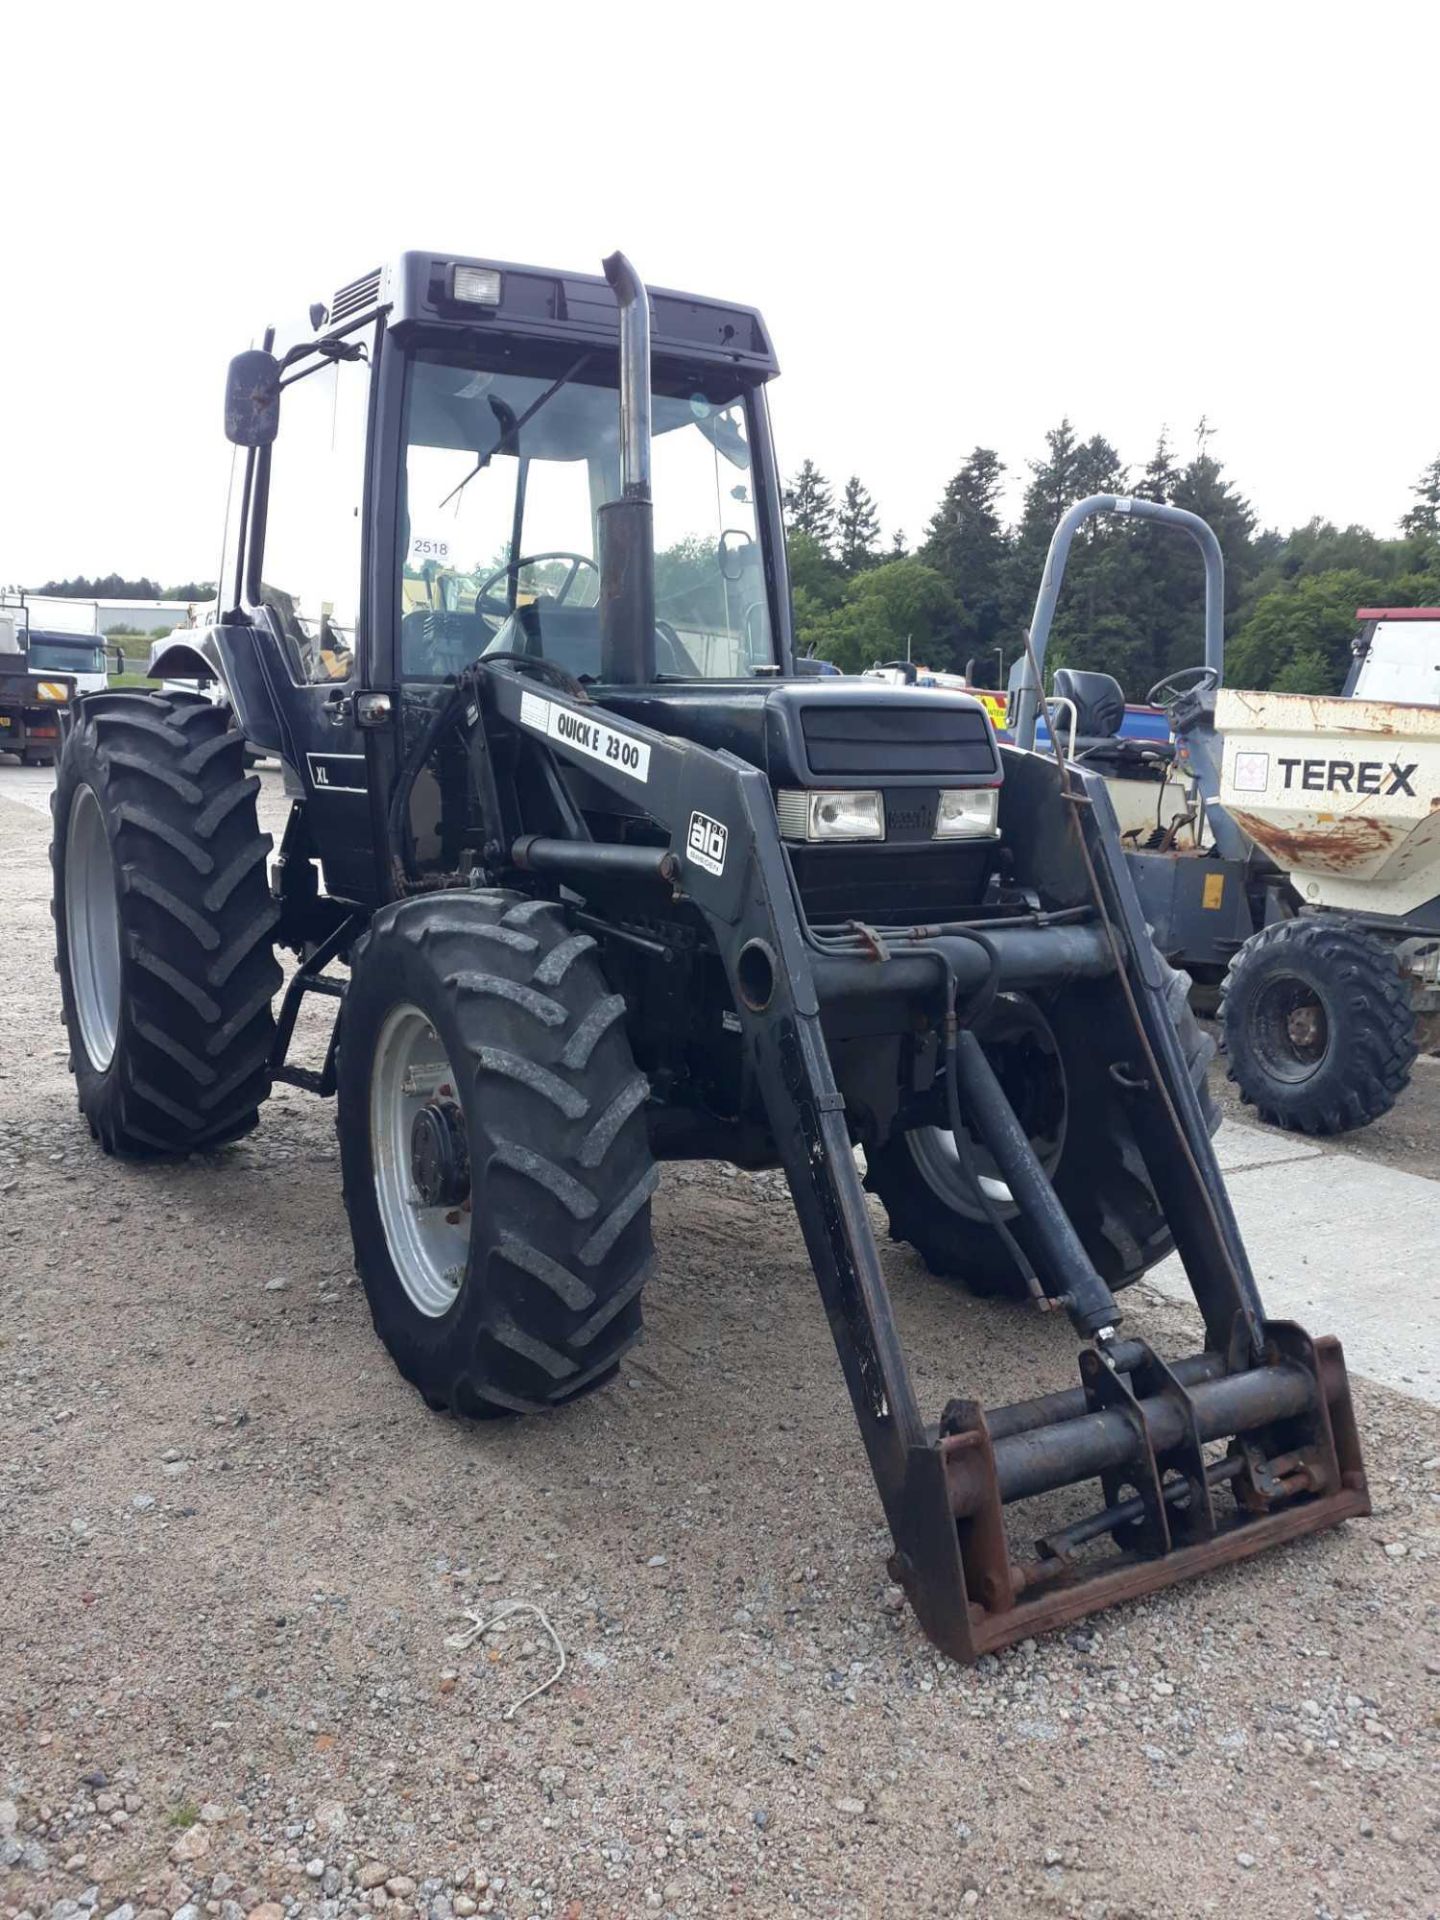 Case International 895XL - 0cc Tractor - Image 2 of 4